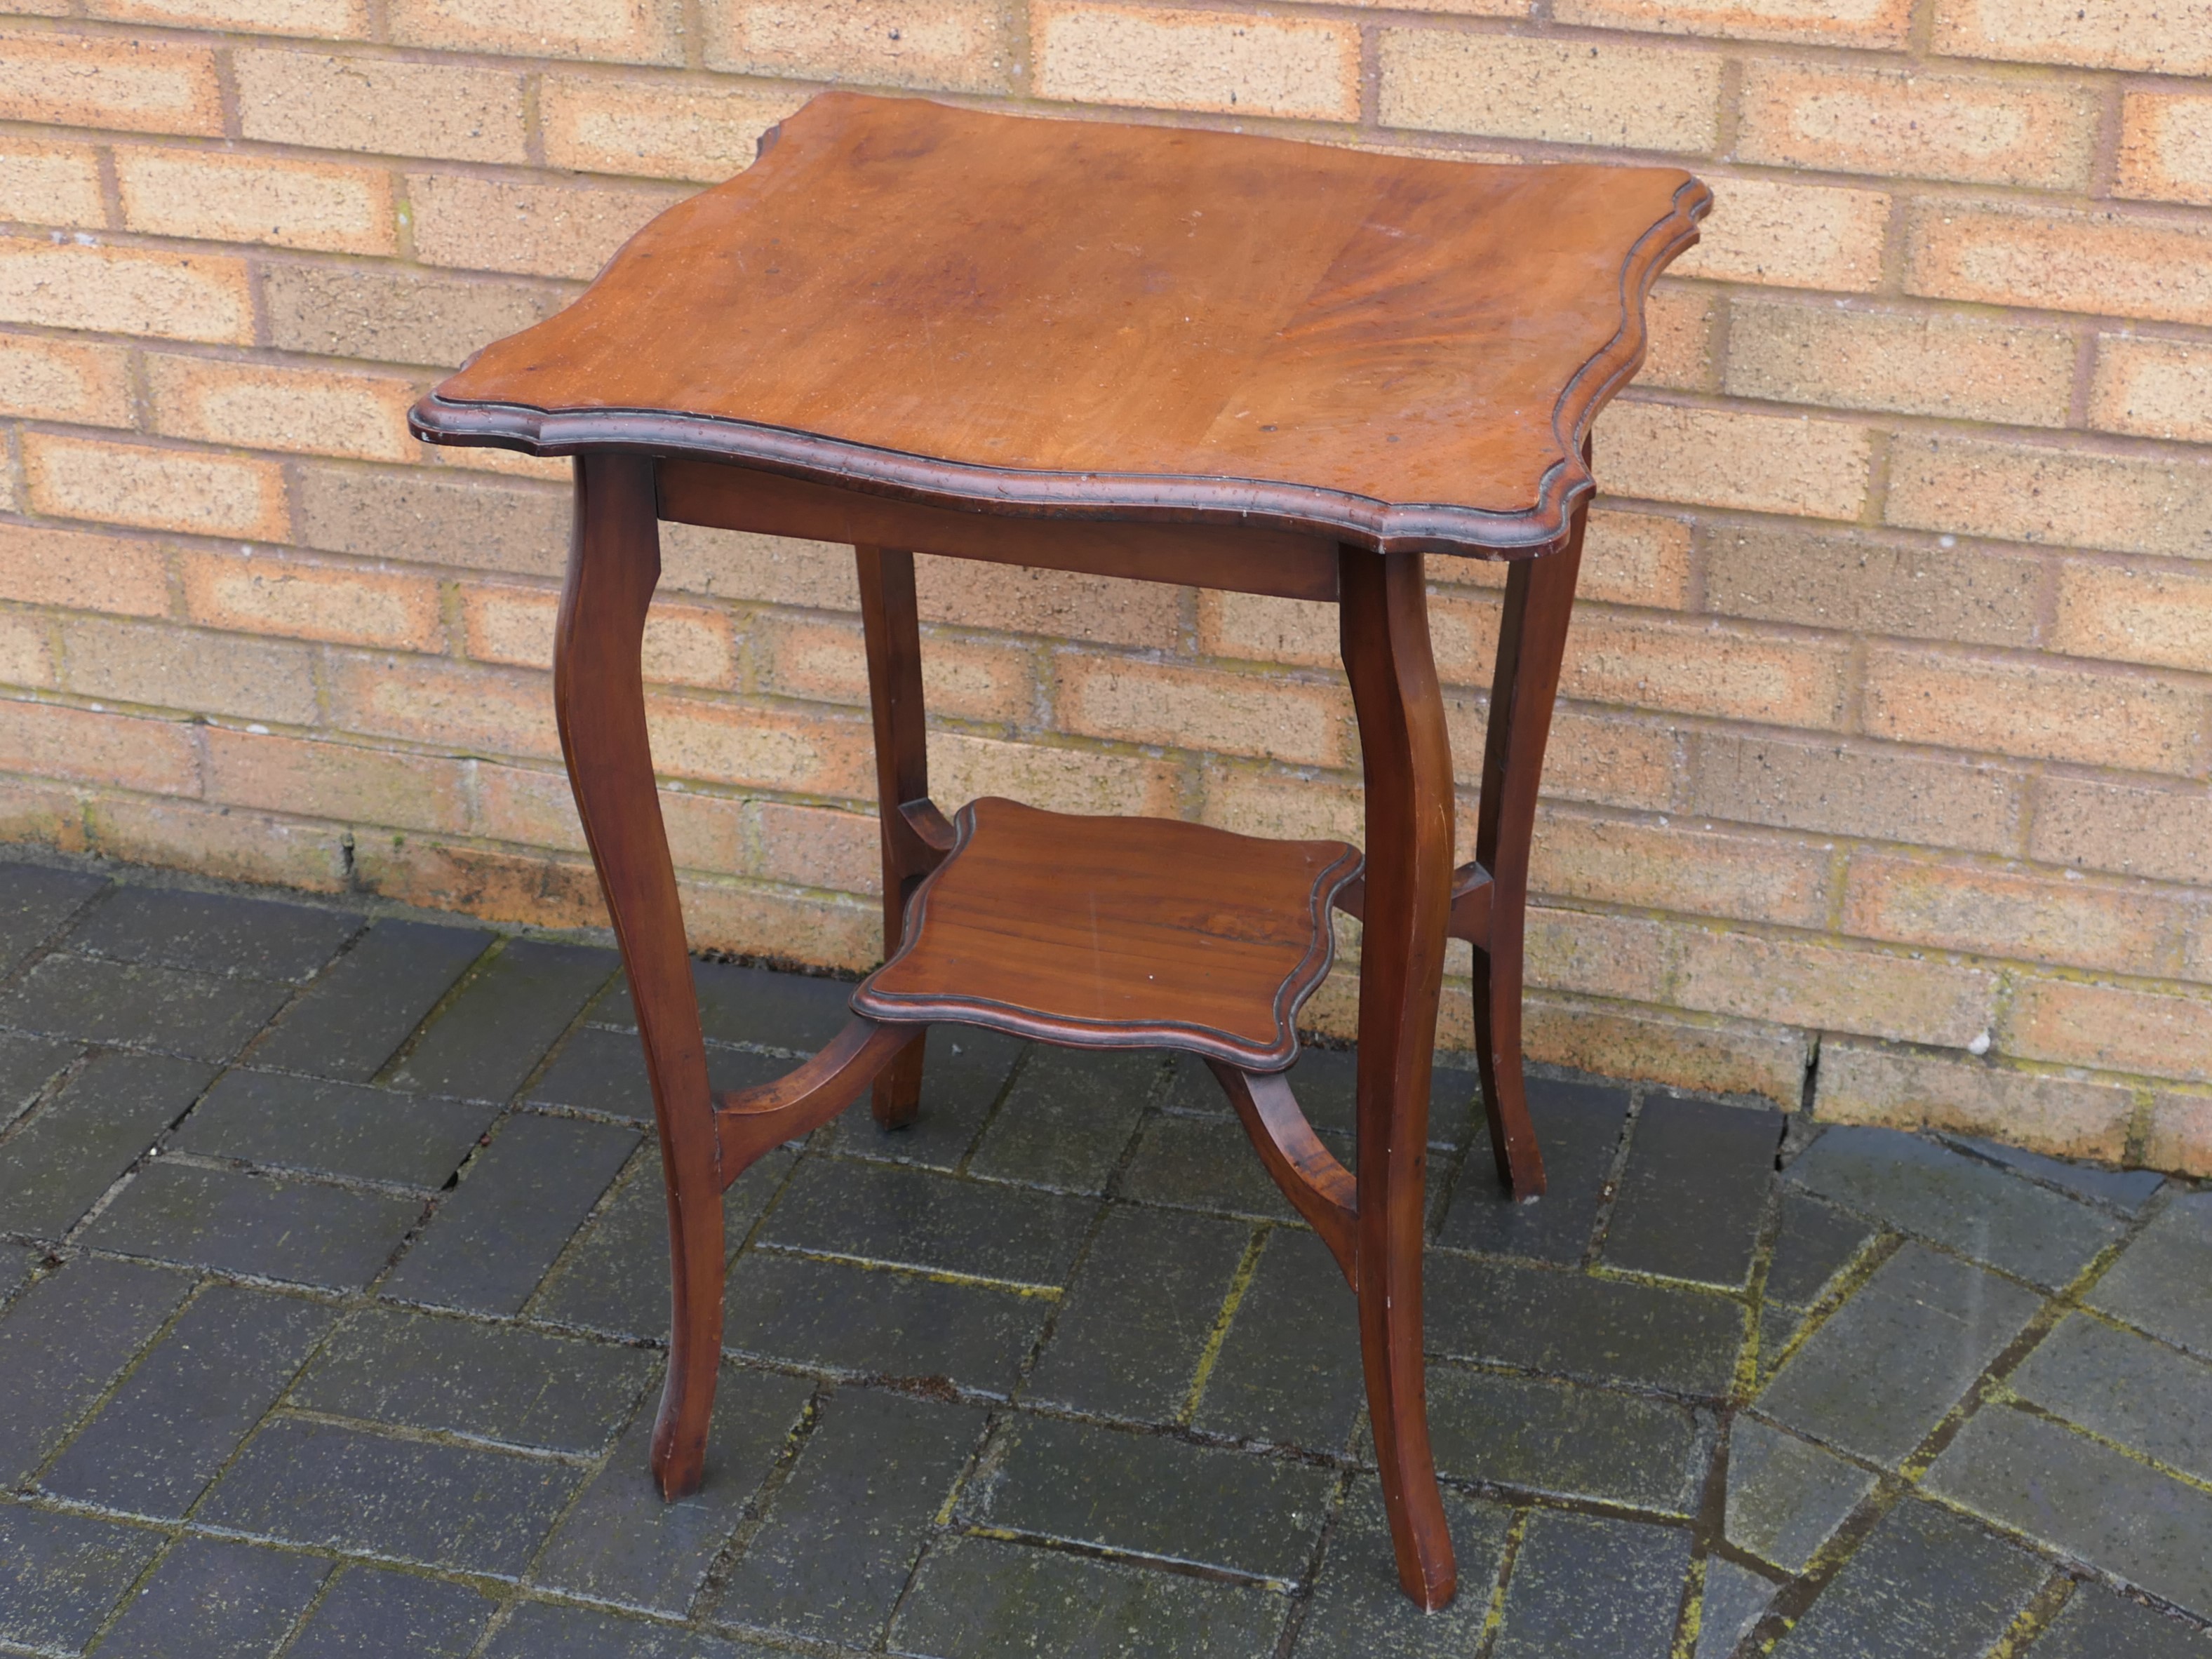 A side table with undertier and shaped top, approximately 71 cm x 53 cm x 55 cm.